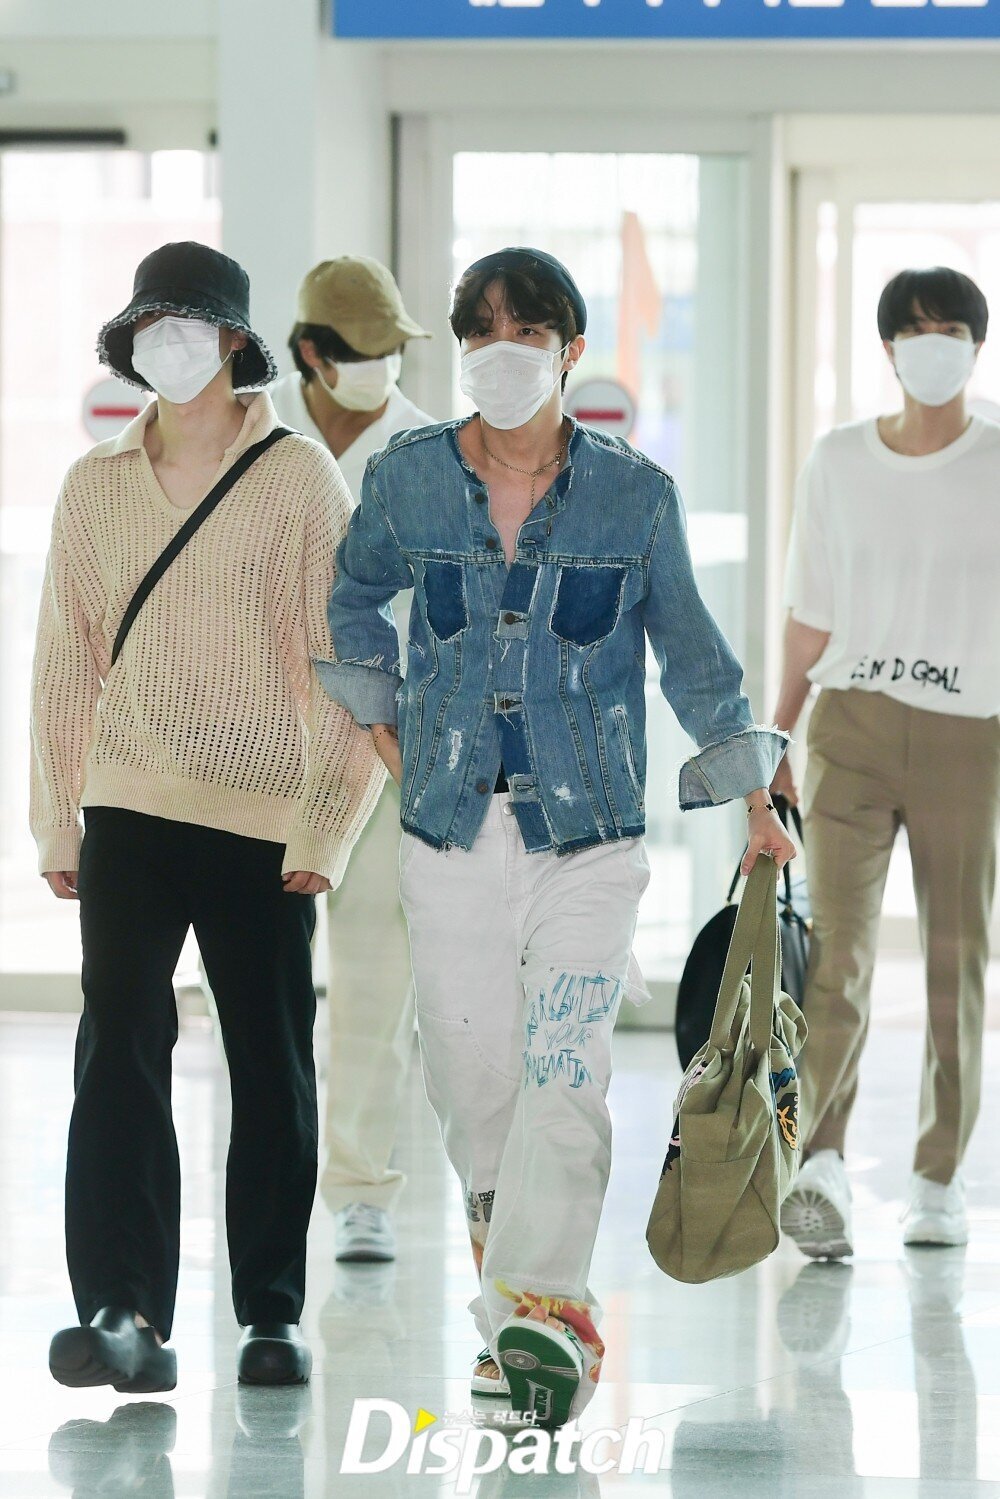 BTS's J-Hope turns the Incheon International Airport into his